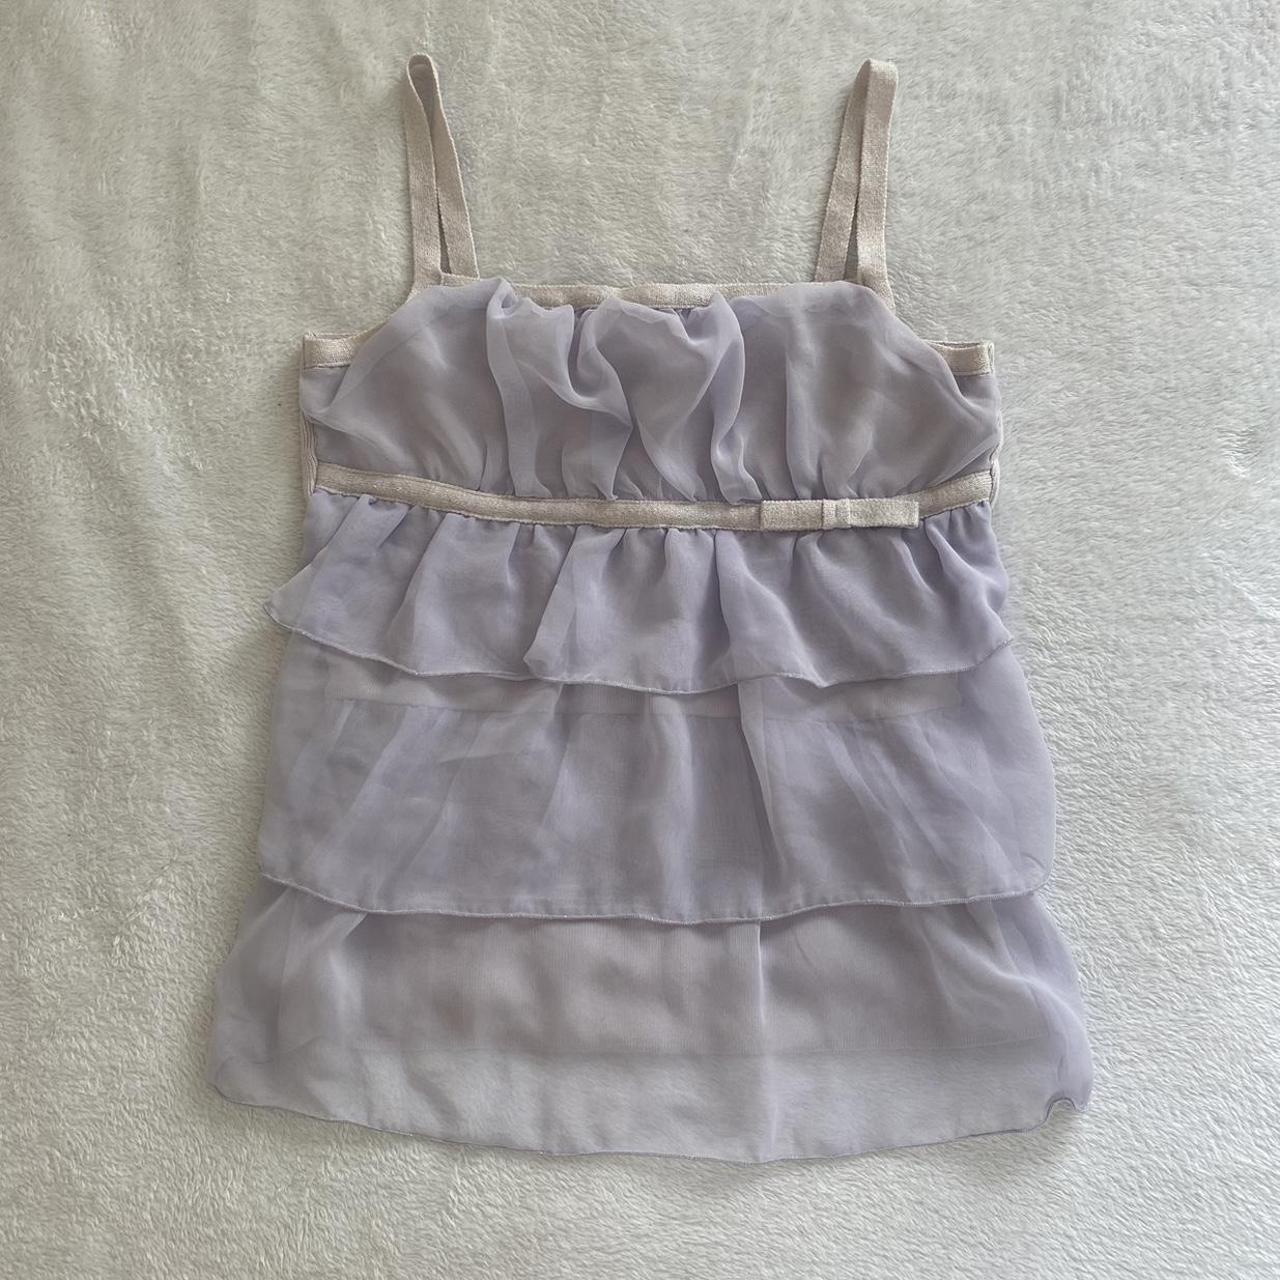 Coquette japanese milkmaid cami top, tiered lace... - Depop